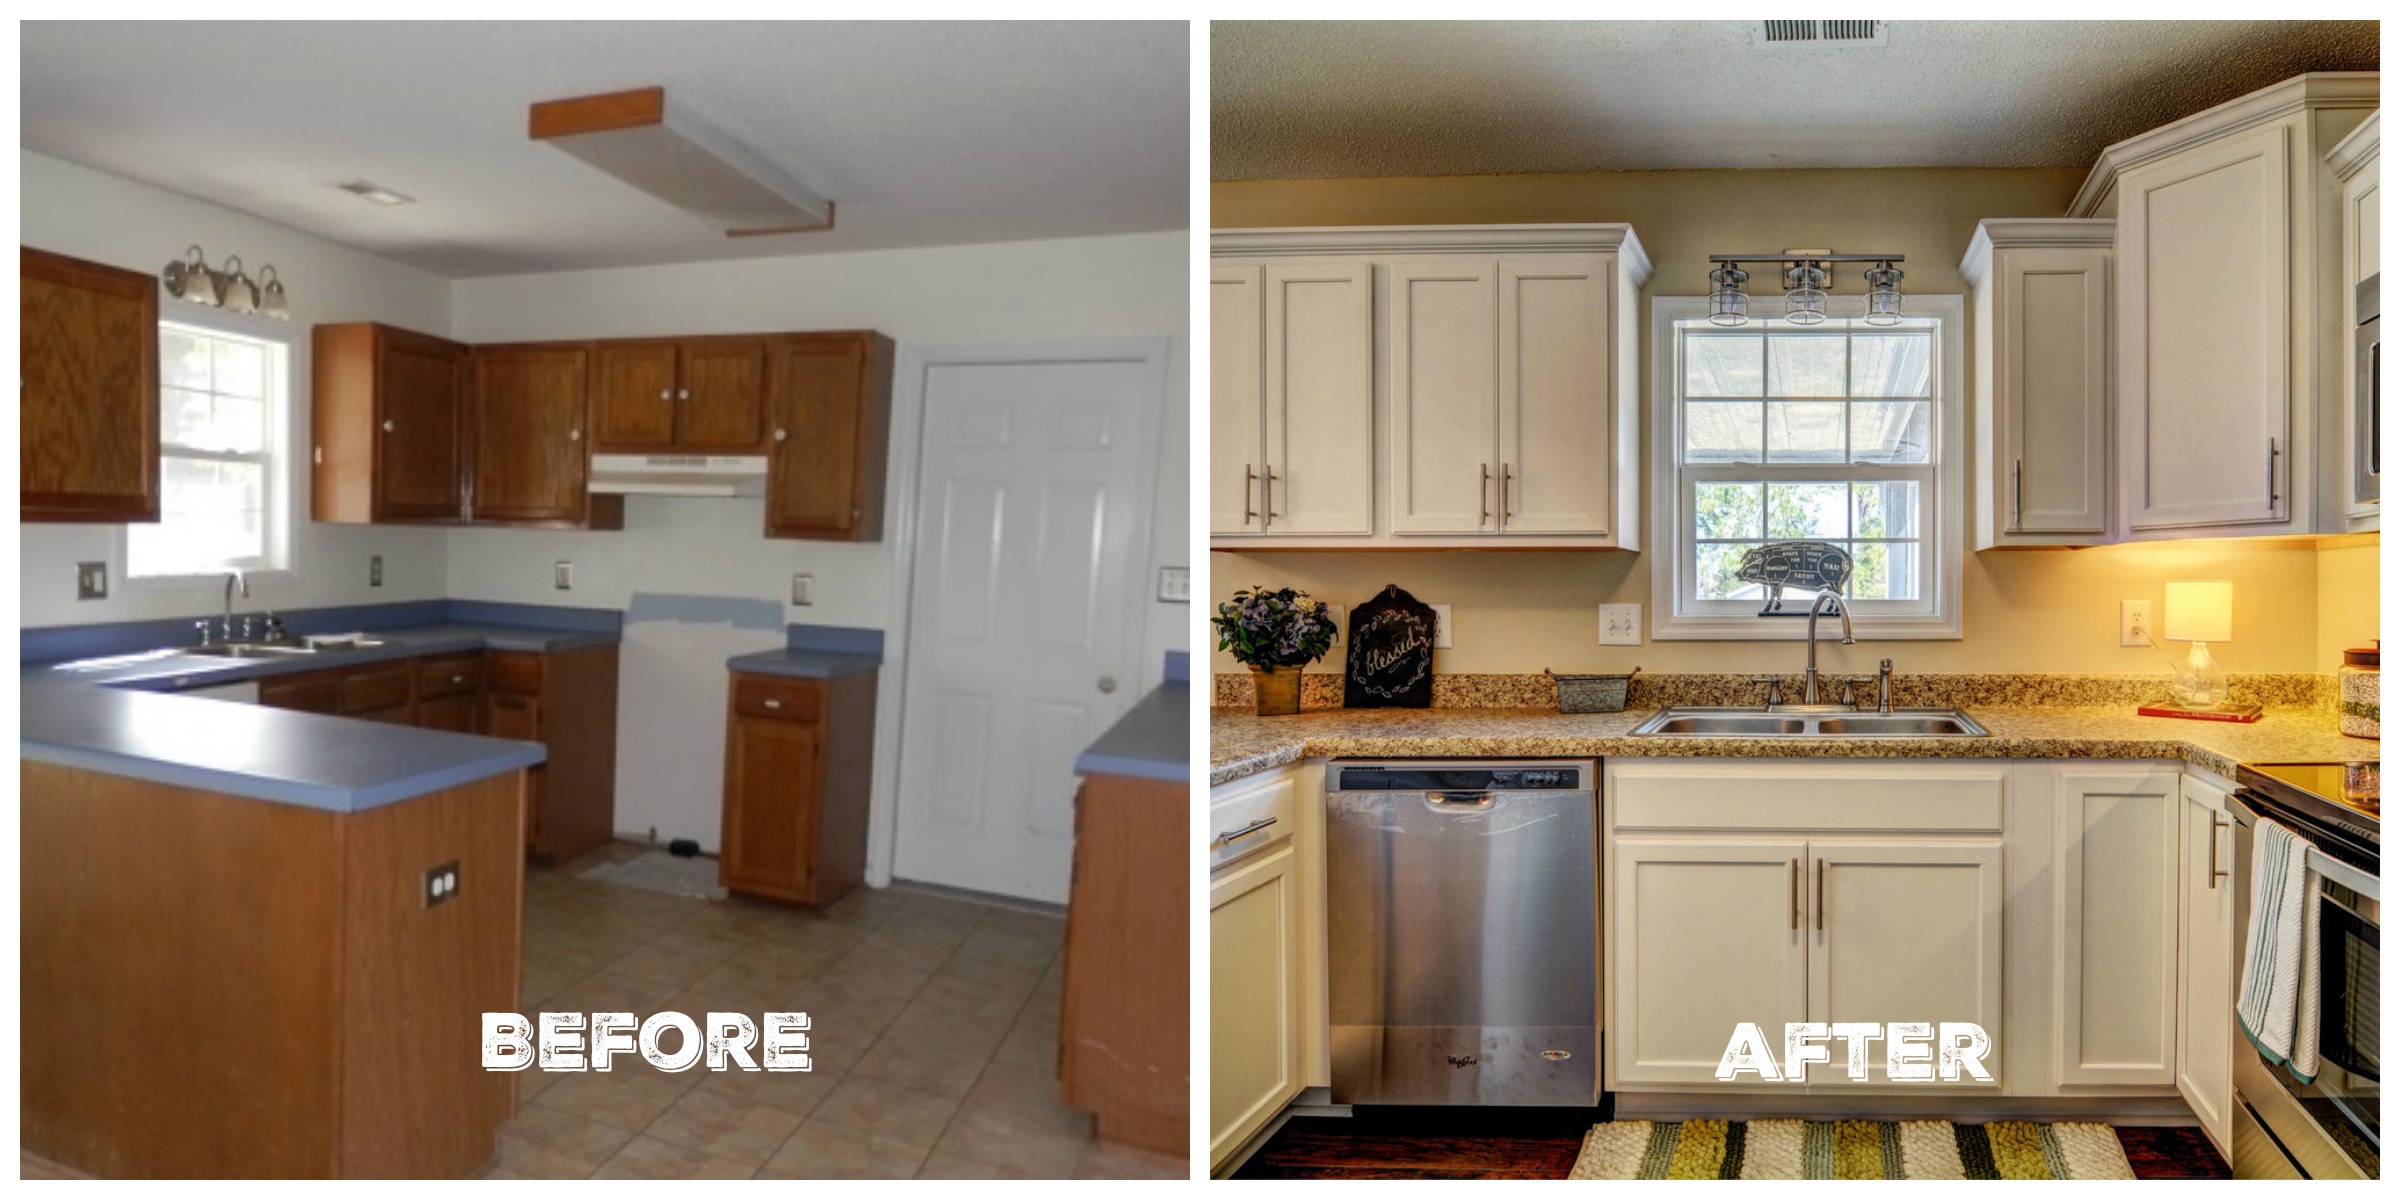 Before & After Kitchen | Flip House Reveal | The Everyday Home